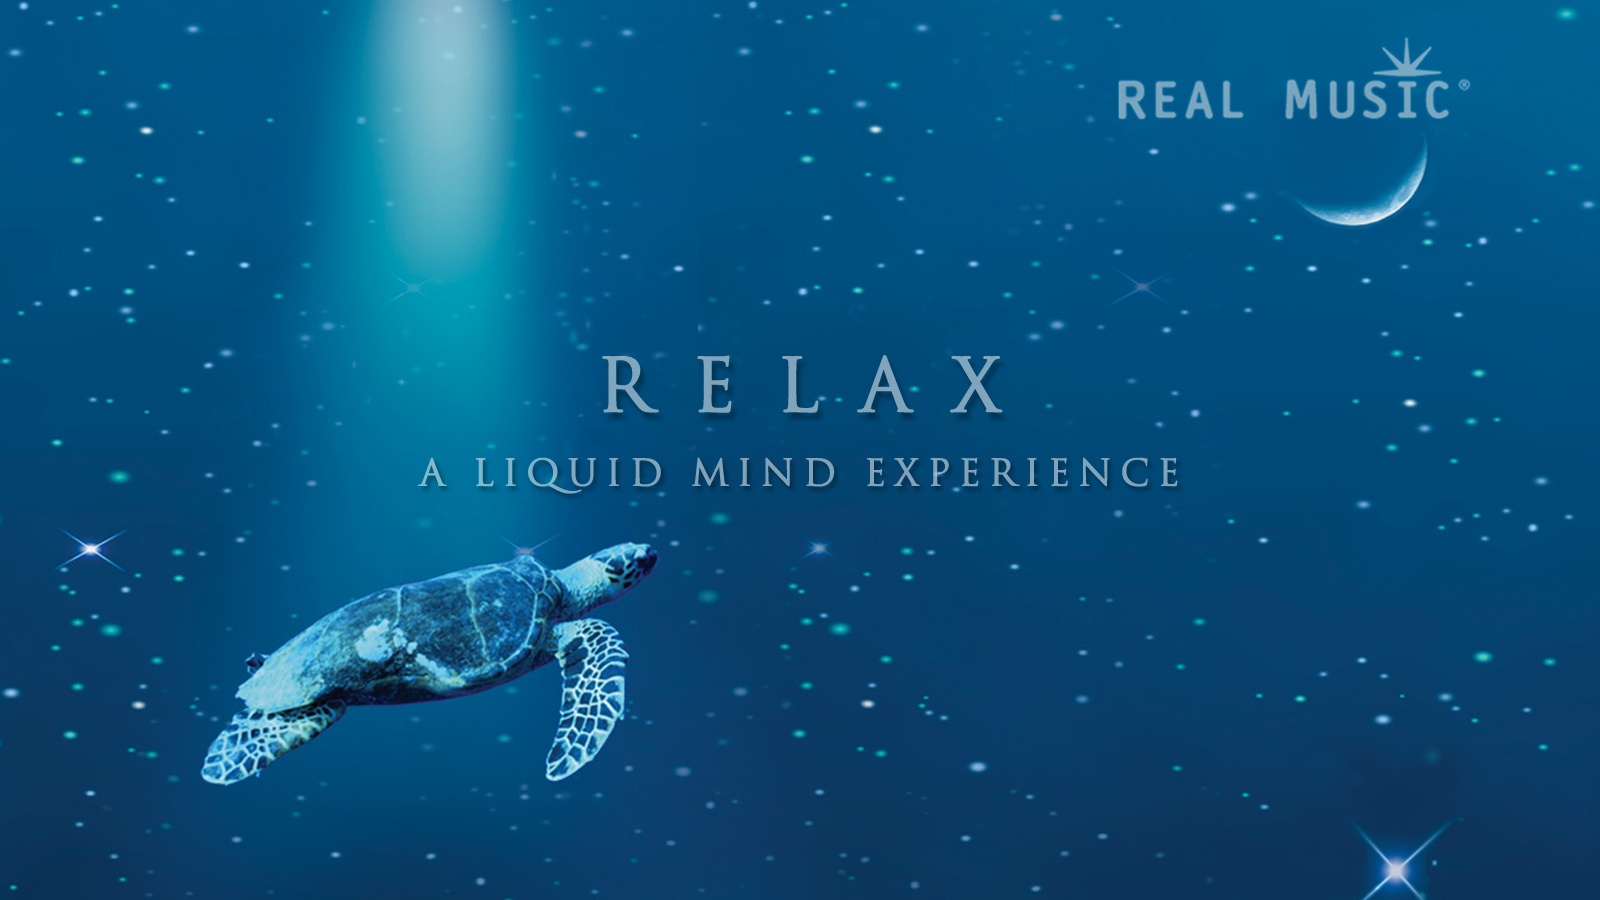 The Liquid Mind Relax Wallpaper Collection